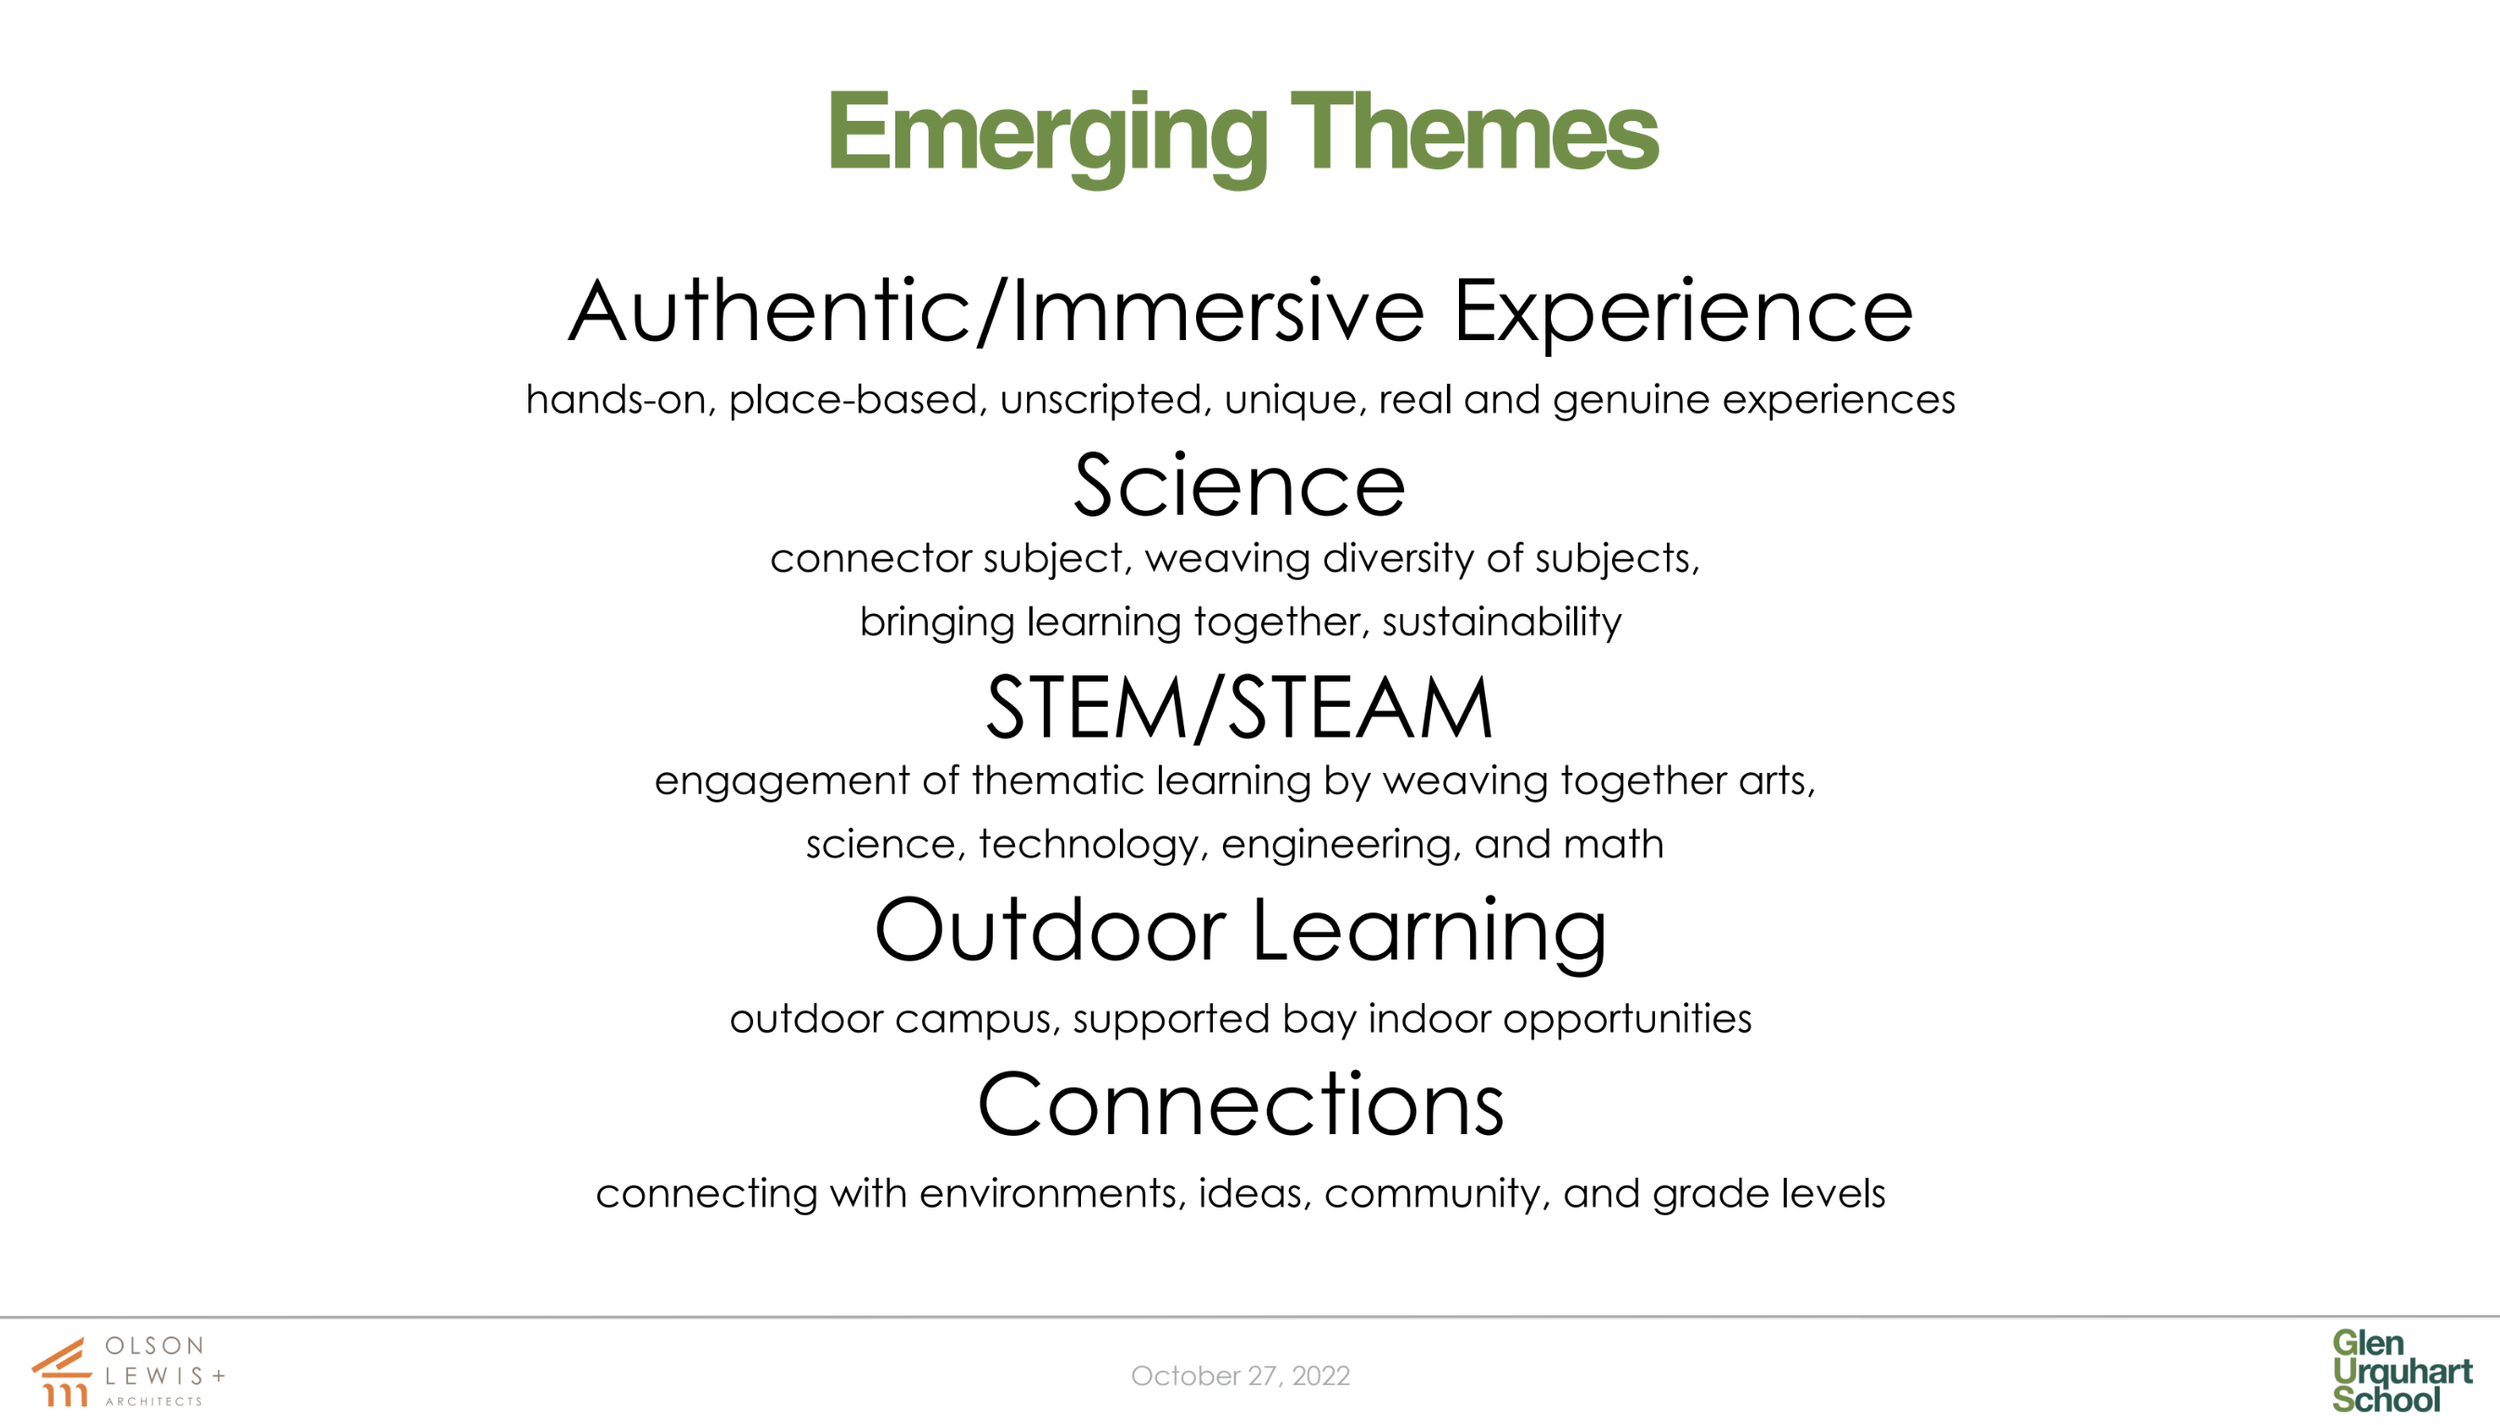 STEM, STEAM, Make, Dream: Reimagining the Culture of Science, Technology,  Engineering, and Mathematics